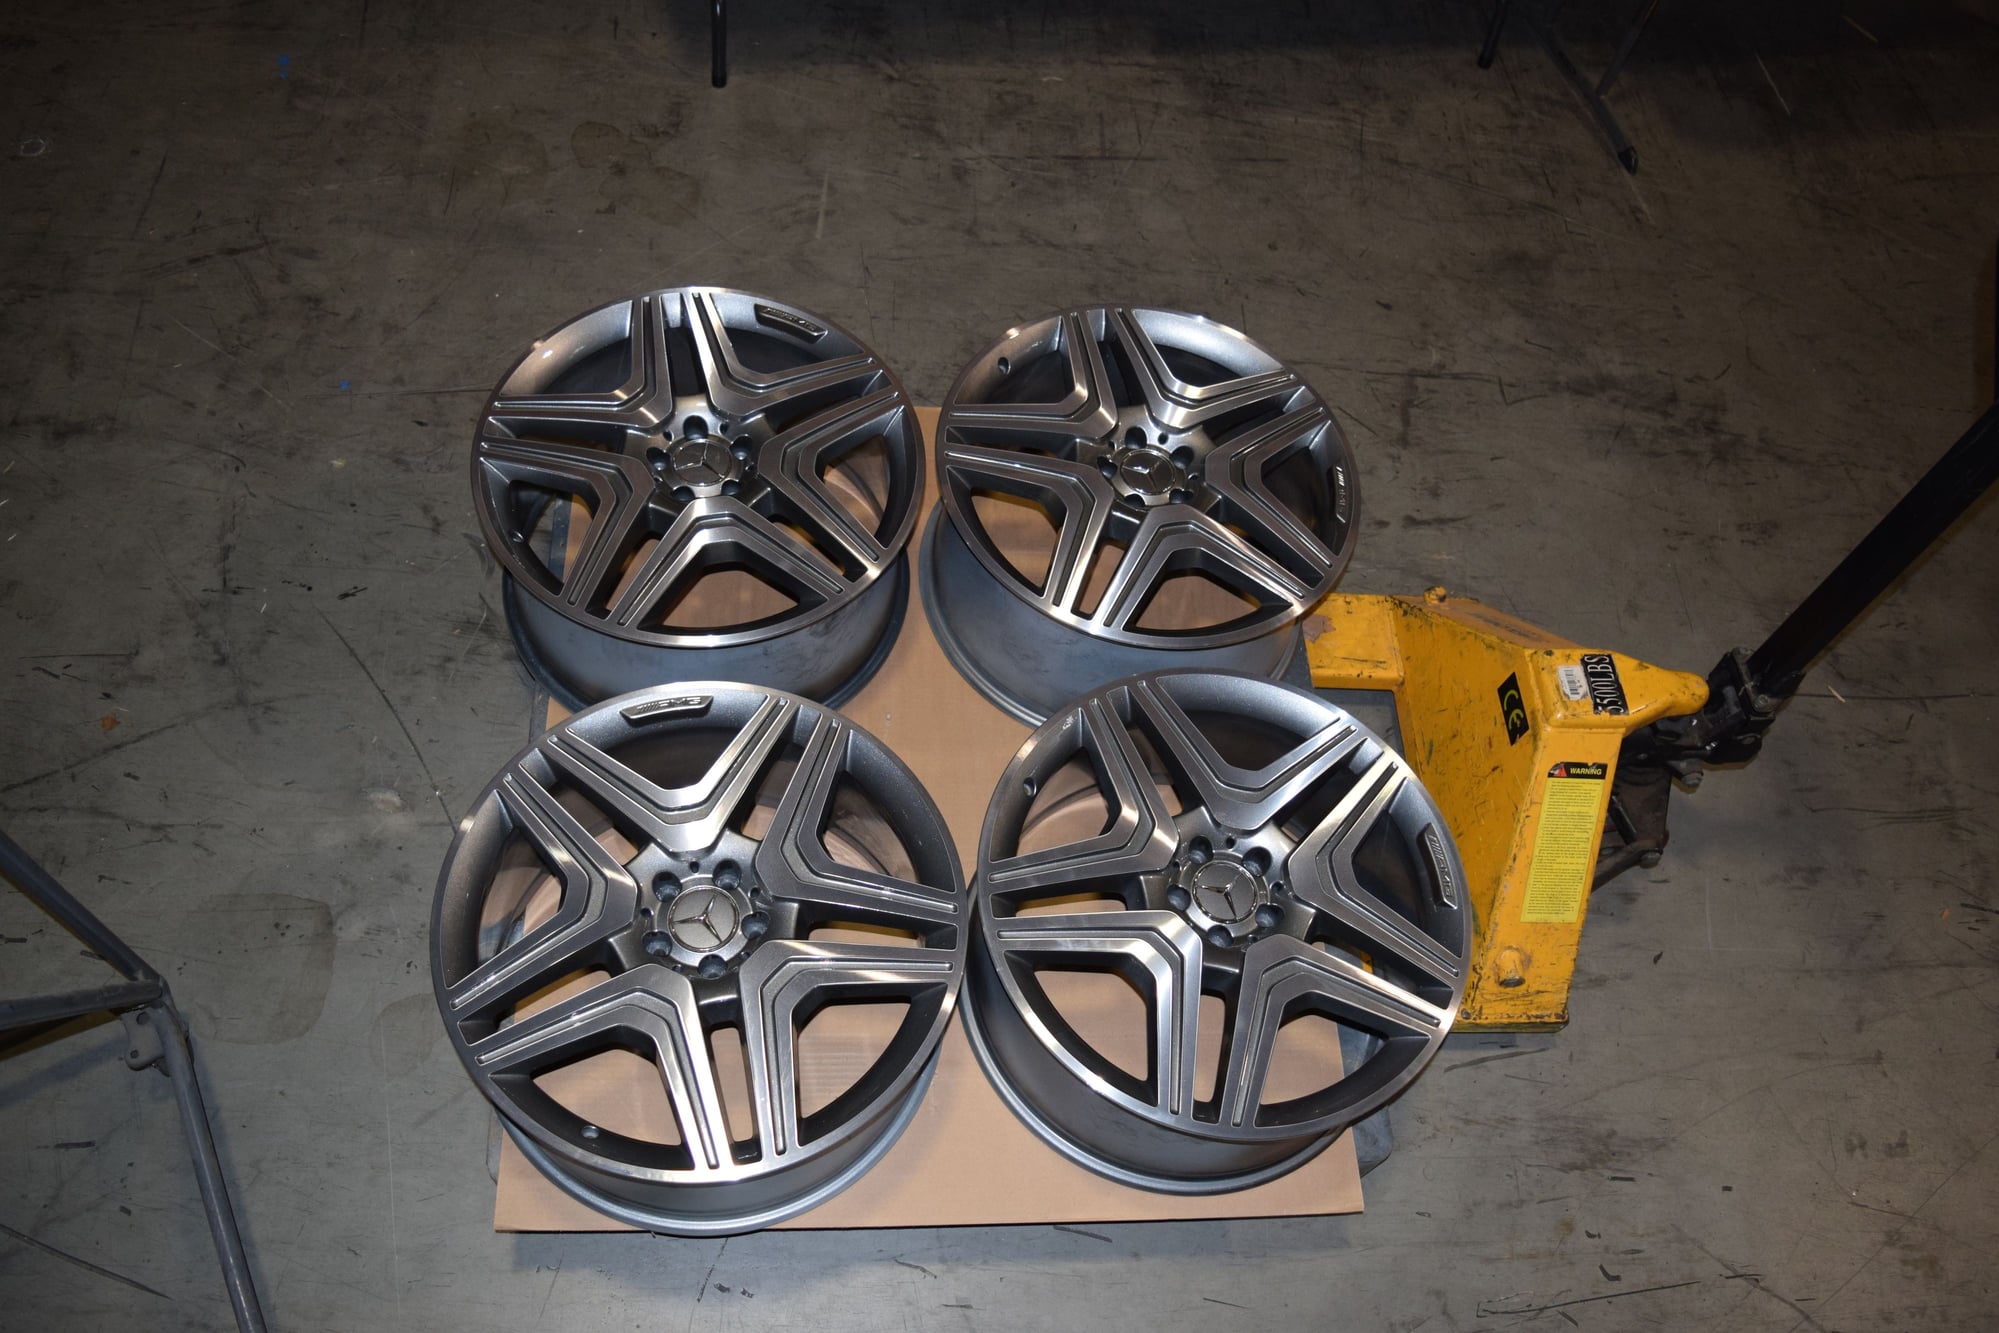 Wheels and Tires/Axles - 21' AMG wheels fits most SUVs - Used - 2012 to 2019 Mercedes-Benz ML63 AMG - Closter, NJ 07624, United States